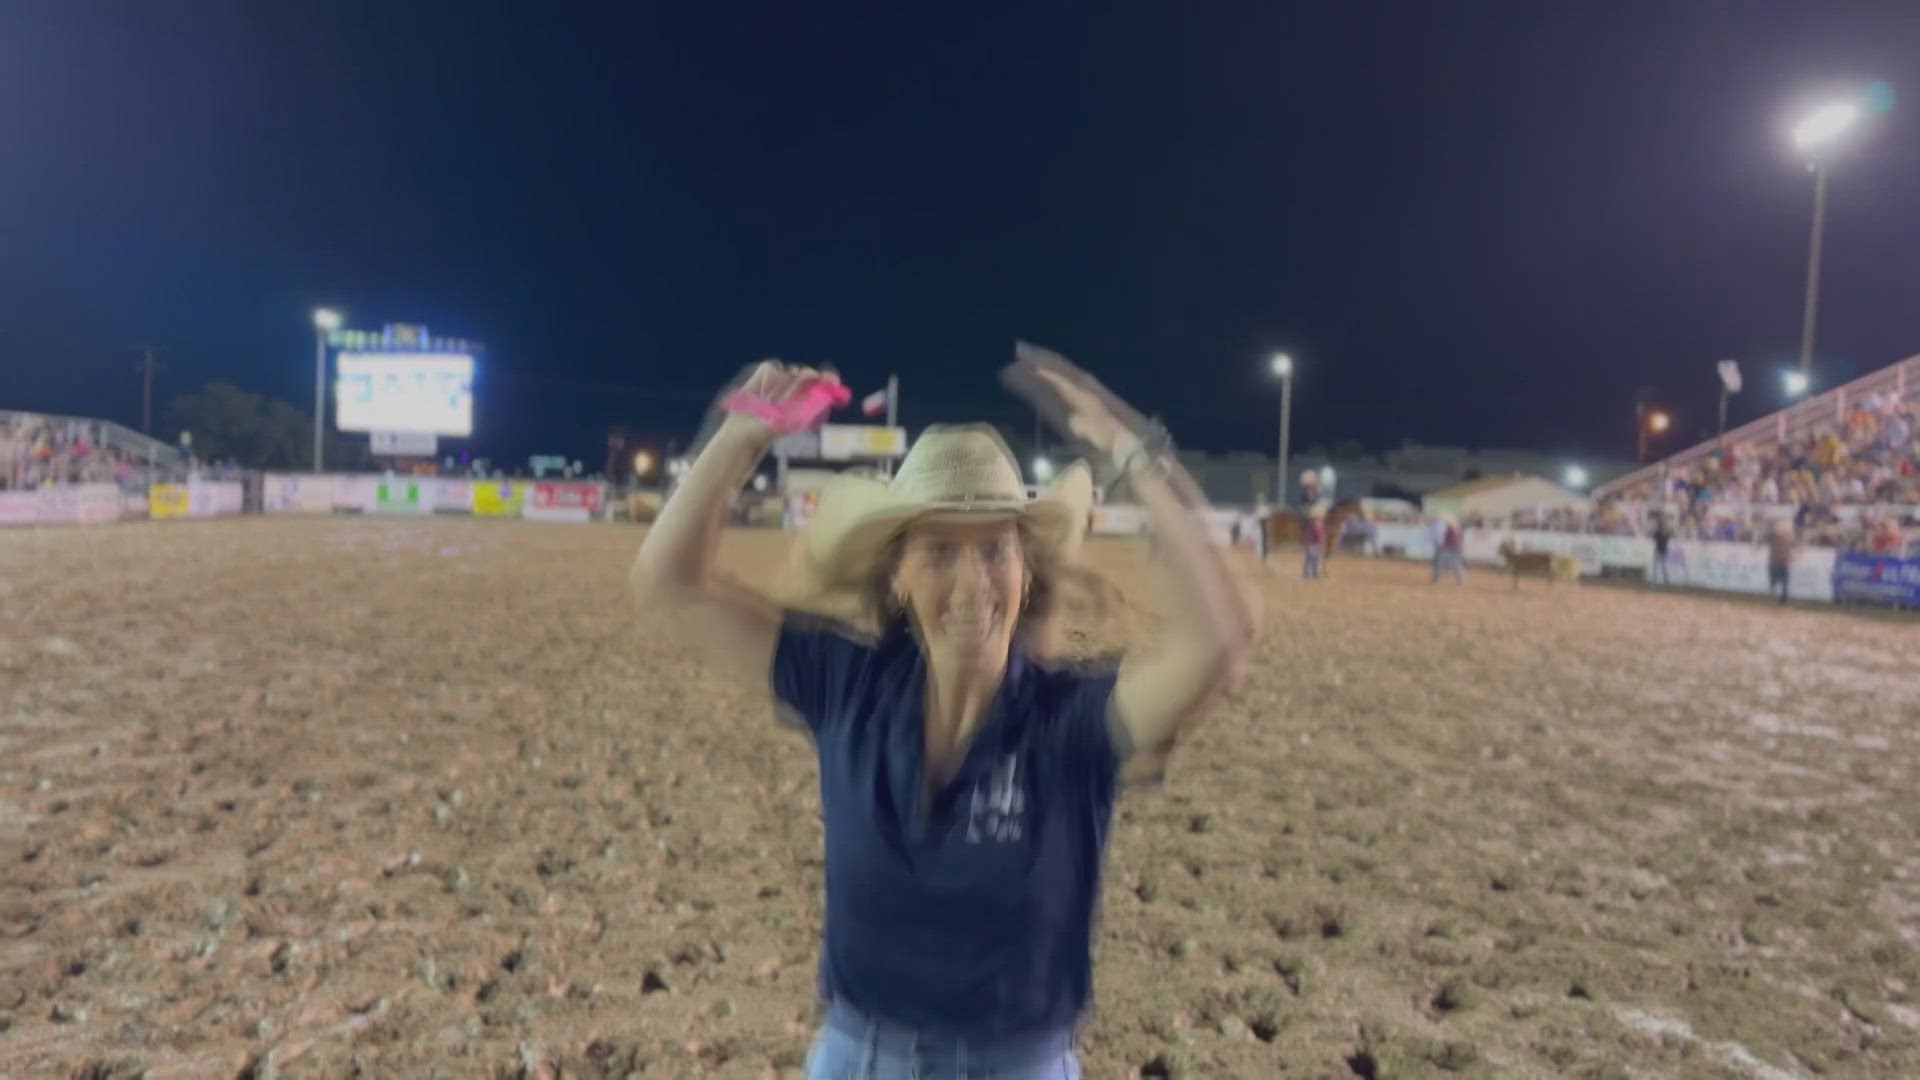 6 News' Nicole Shearin put on her boots at the Killeen Rodeo to participate in the Celebrity Calf Scramble, bringing home a ribbon!